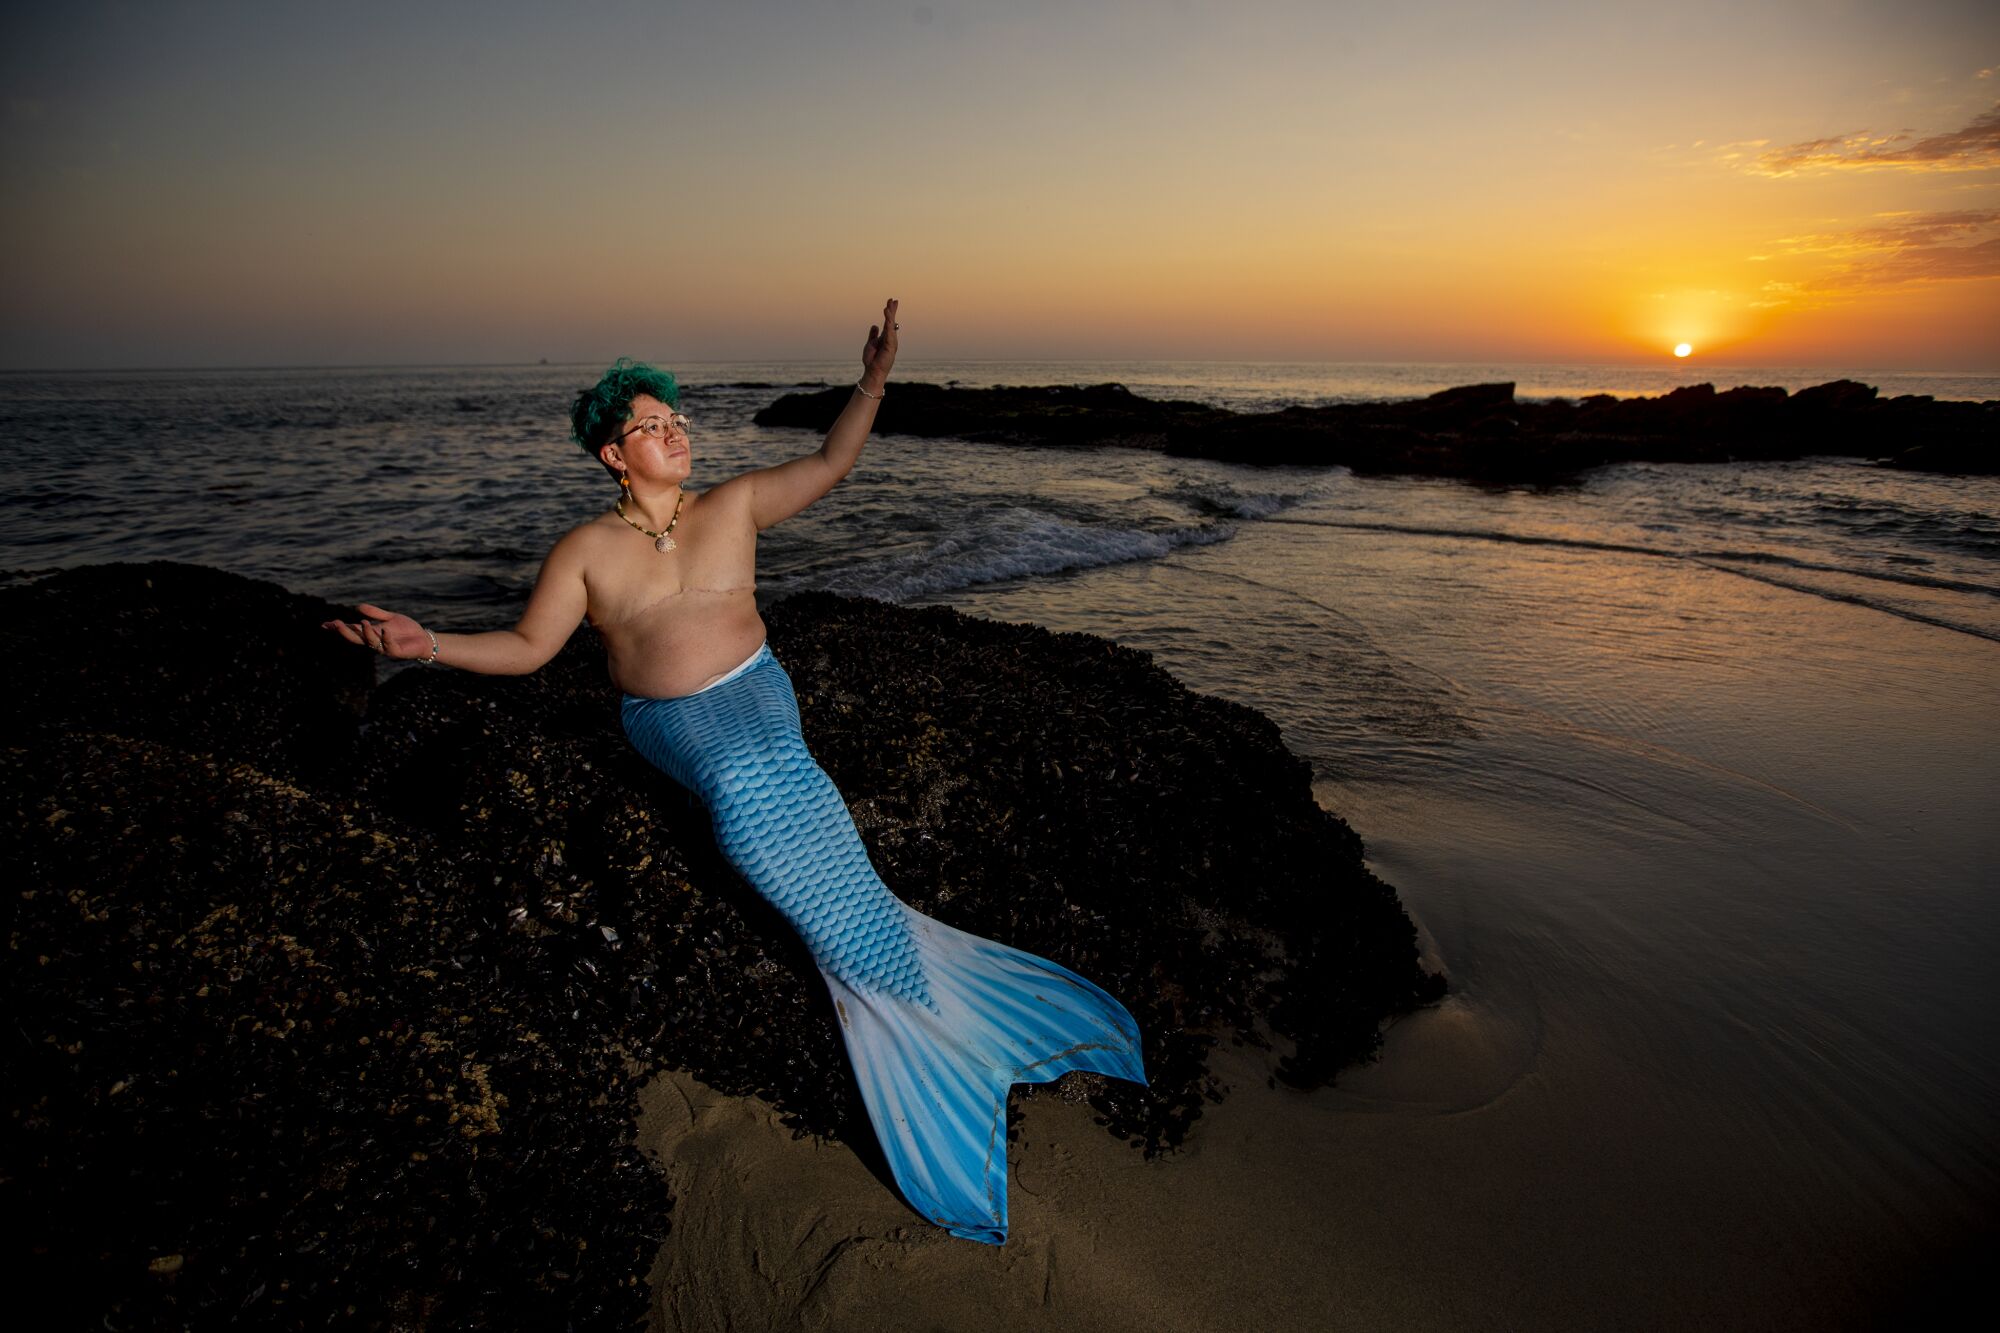 Sammy Silva, dressed in a mermaid outfit with a tail and shirtless, poses on the beach.